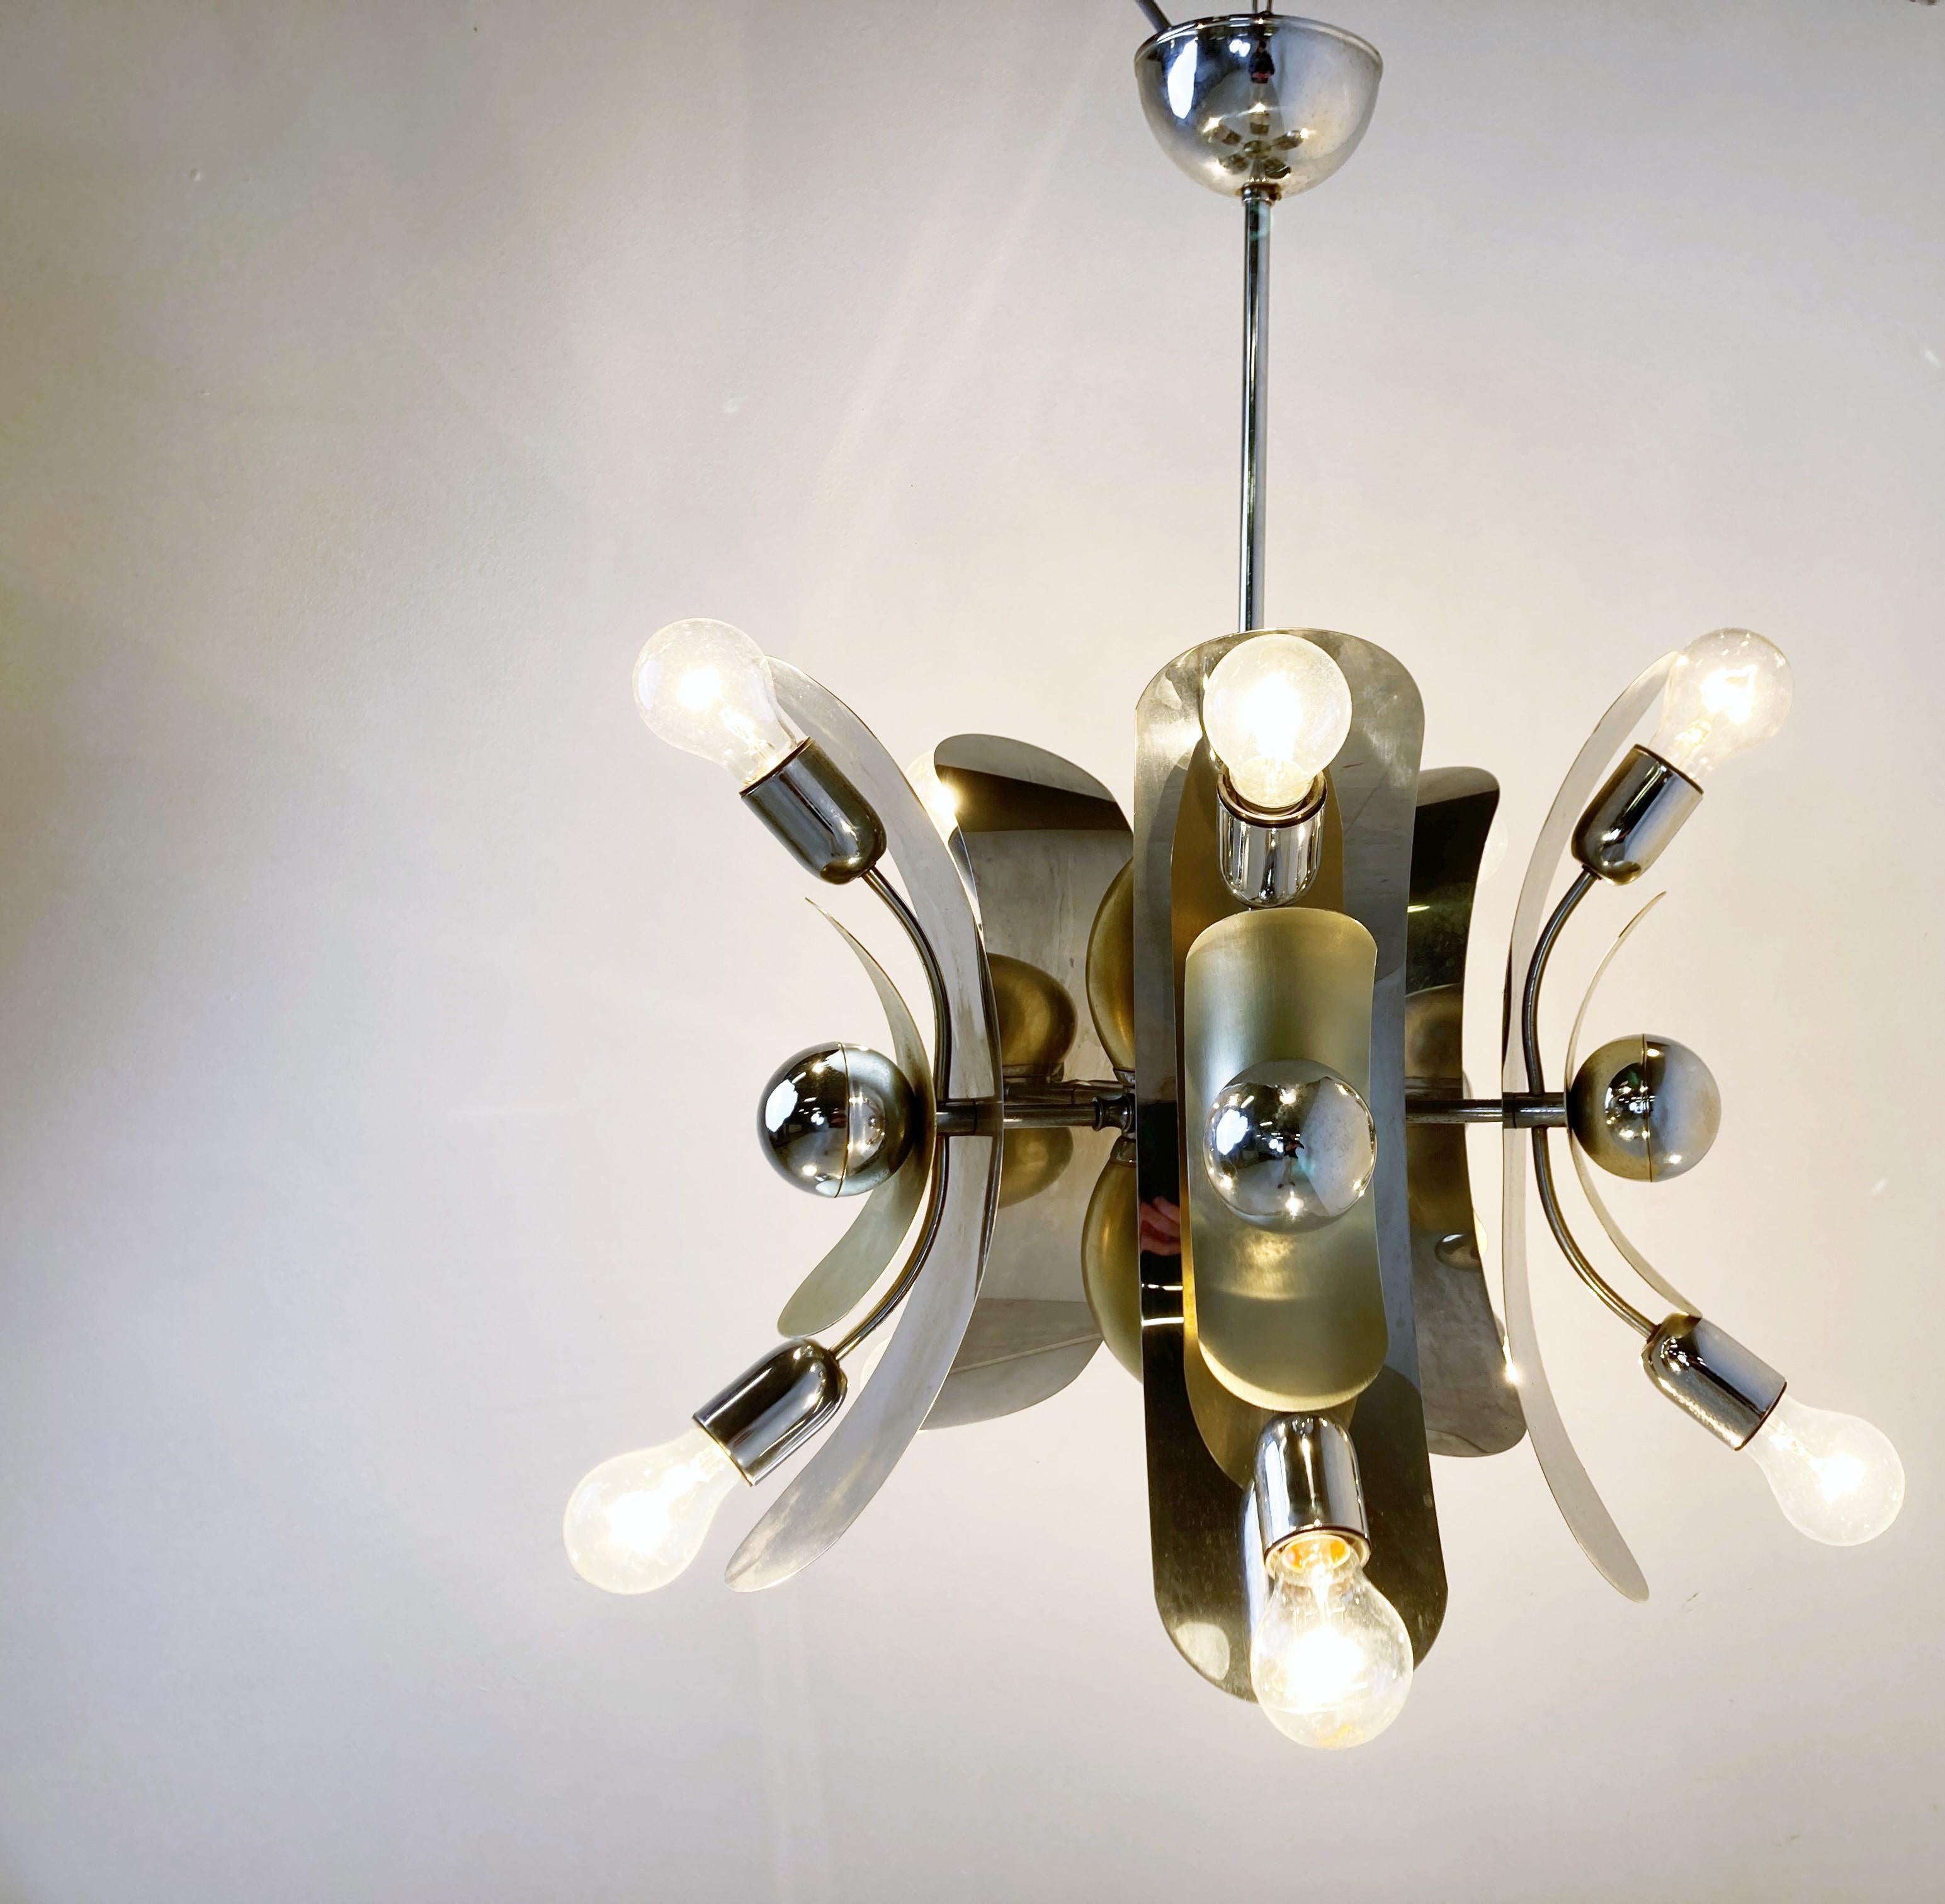 Space Age Vintage Italian Chrome and Brass Chandelier, 1970s For Sale